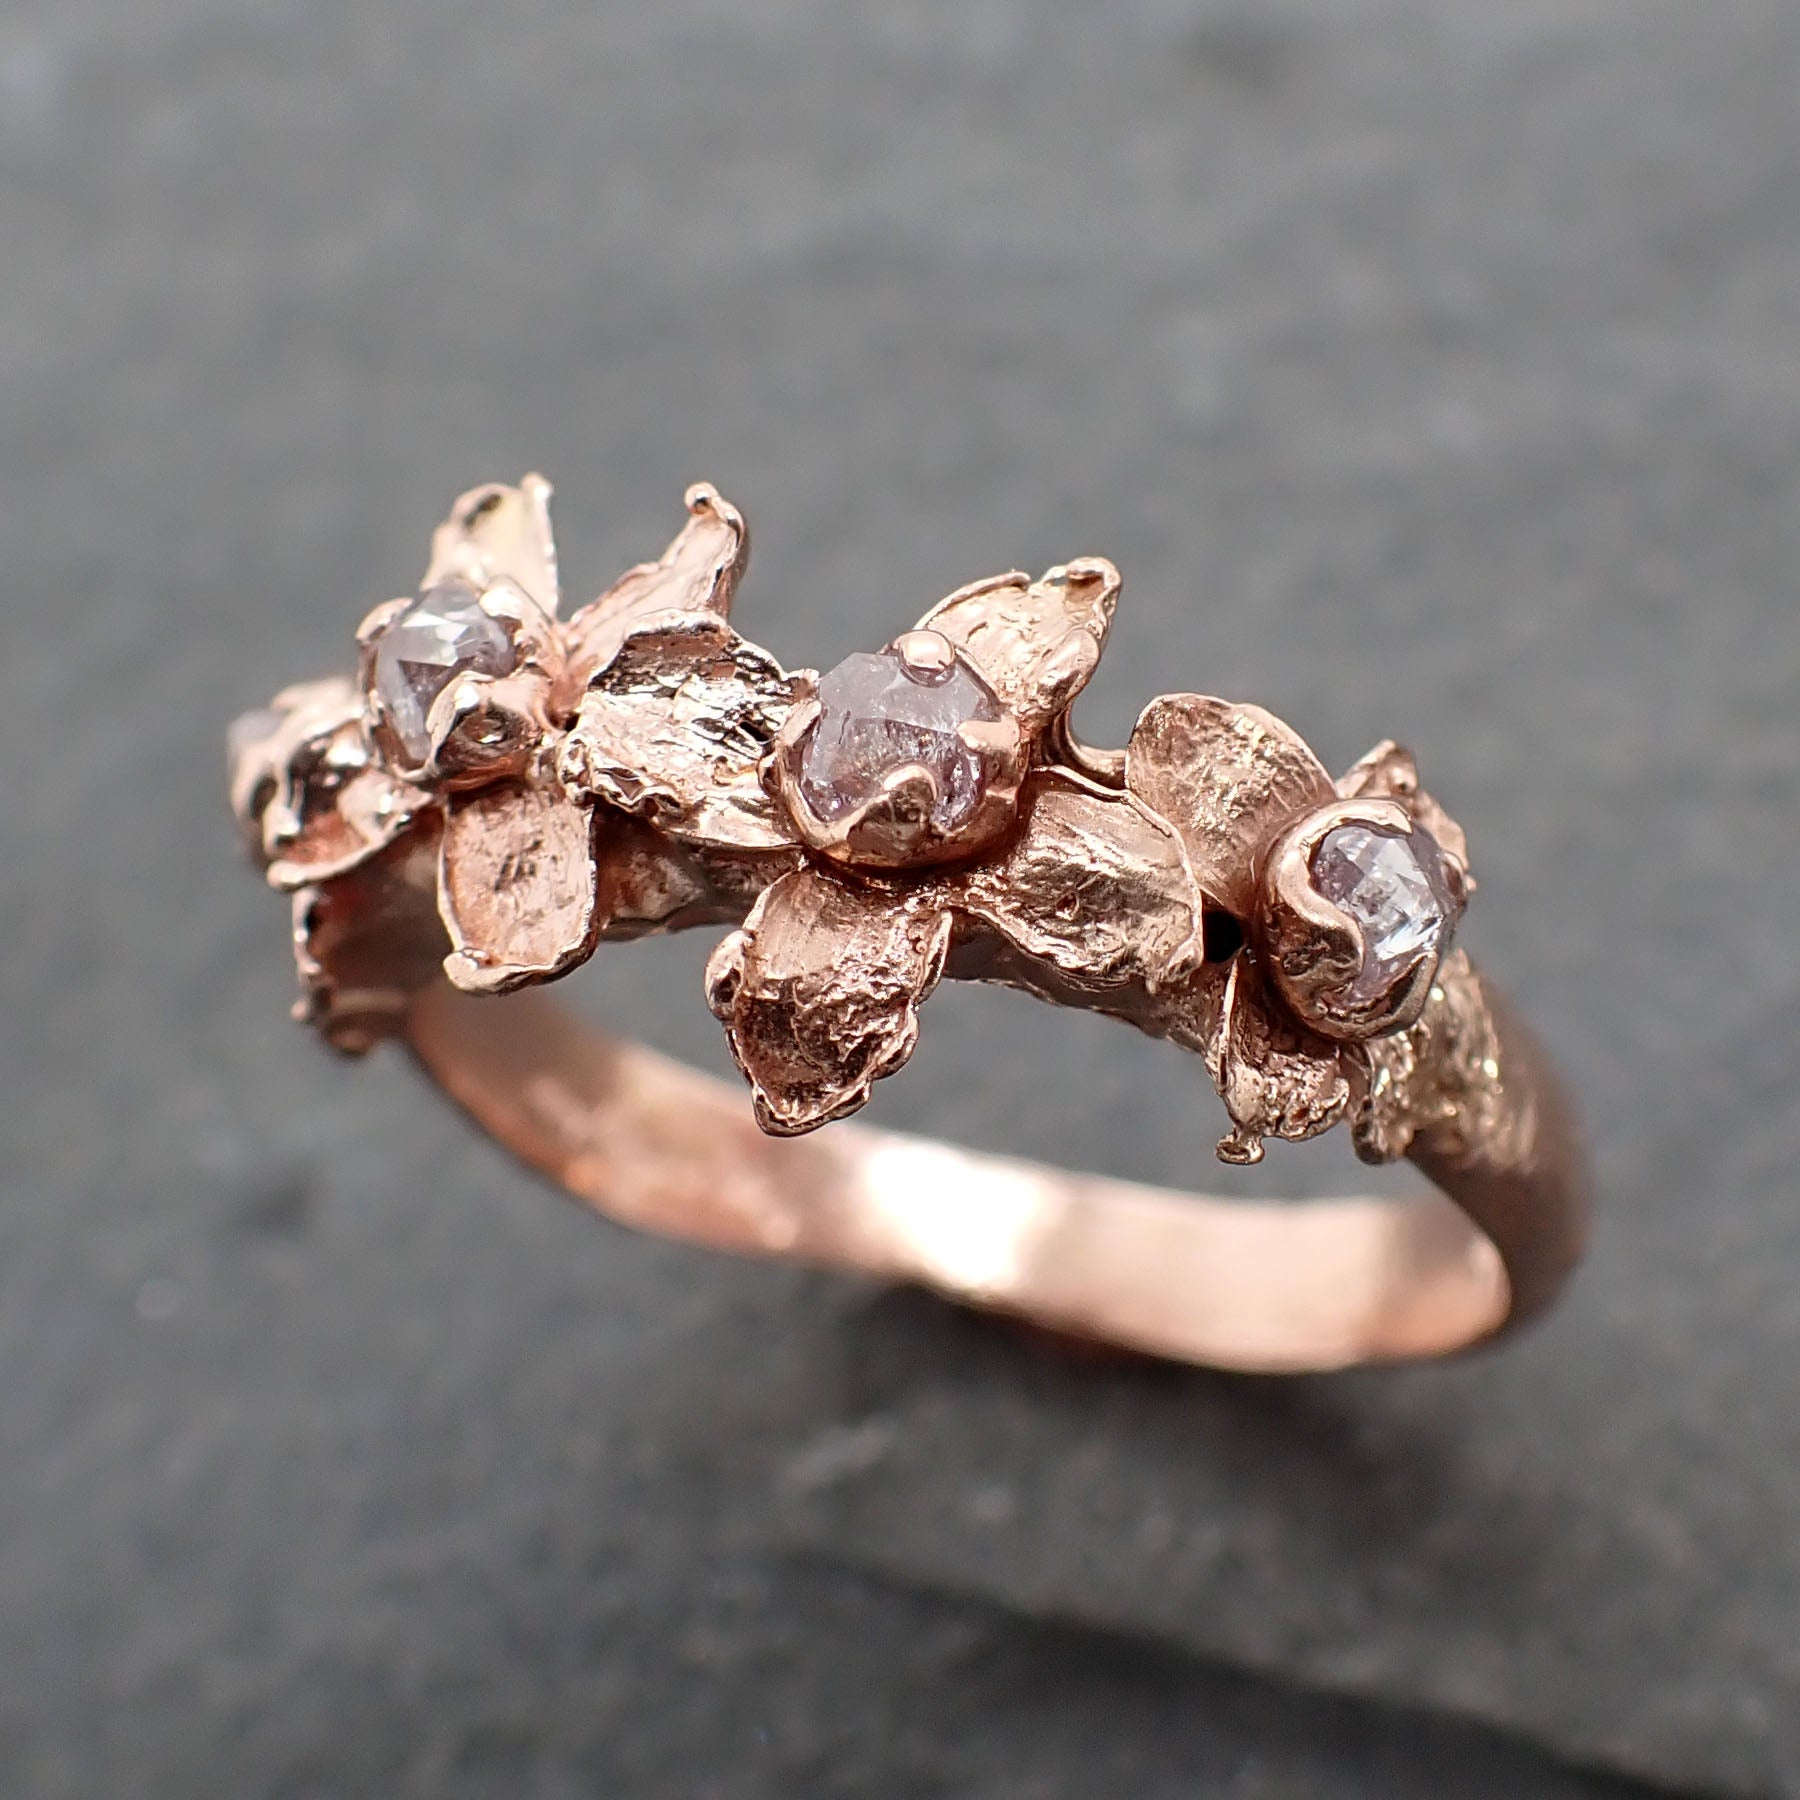 Real Flower and  rubies 14k Rose gold wedding engagement ring Enchanted Garden Floral Ring byAngeline 2499_custom_ruby